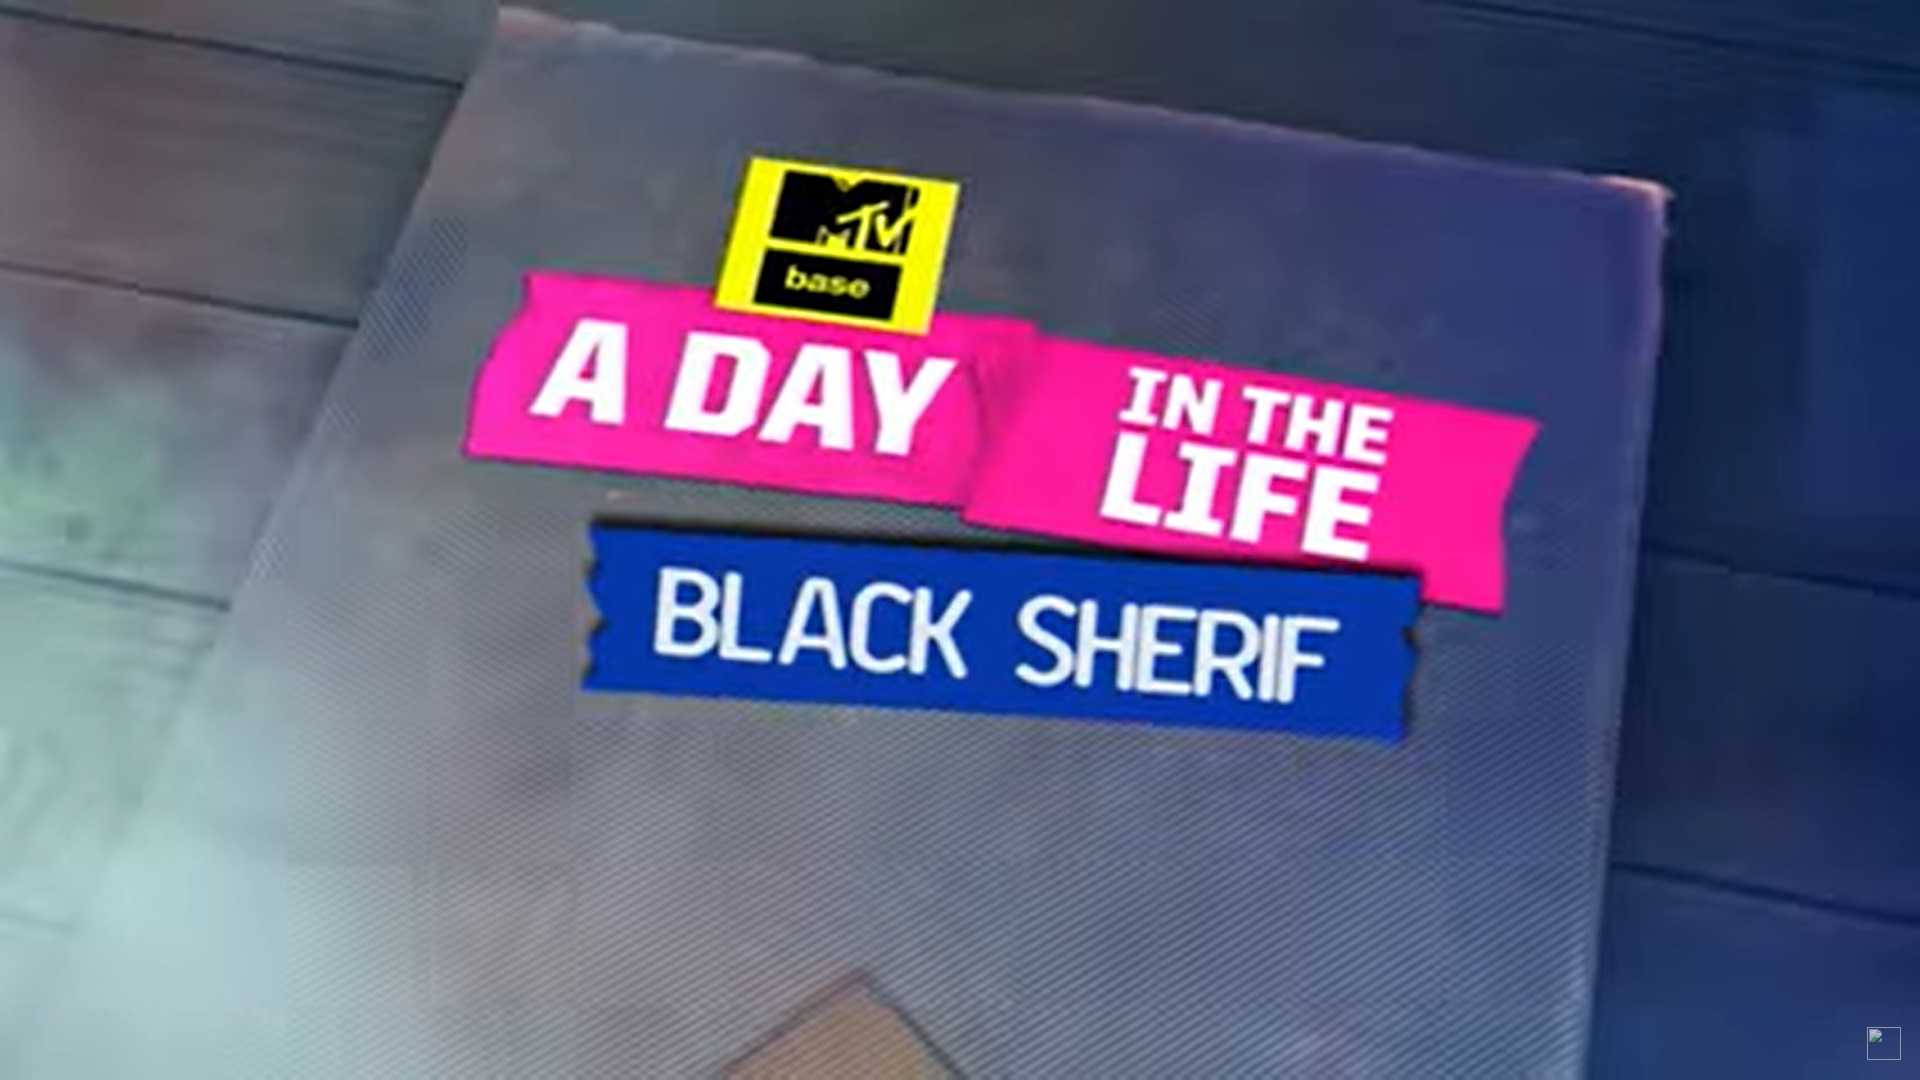 DAT Creative Projects- MTV Base, A day in the life of black Sherif Thumbnail